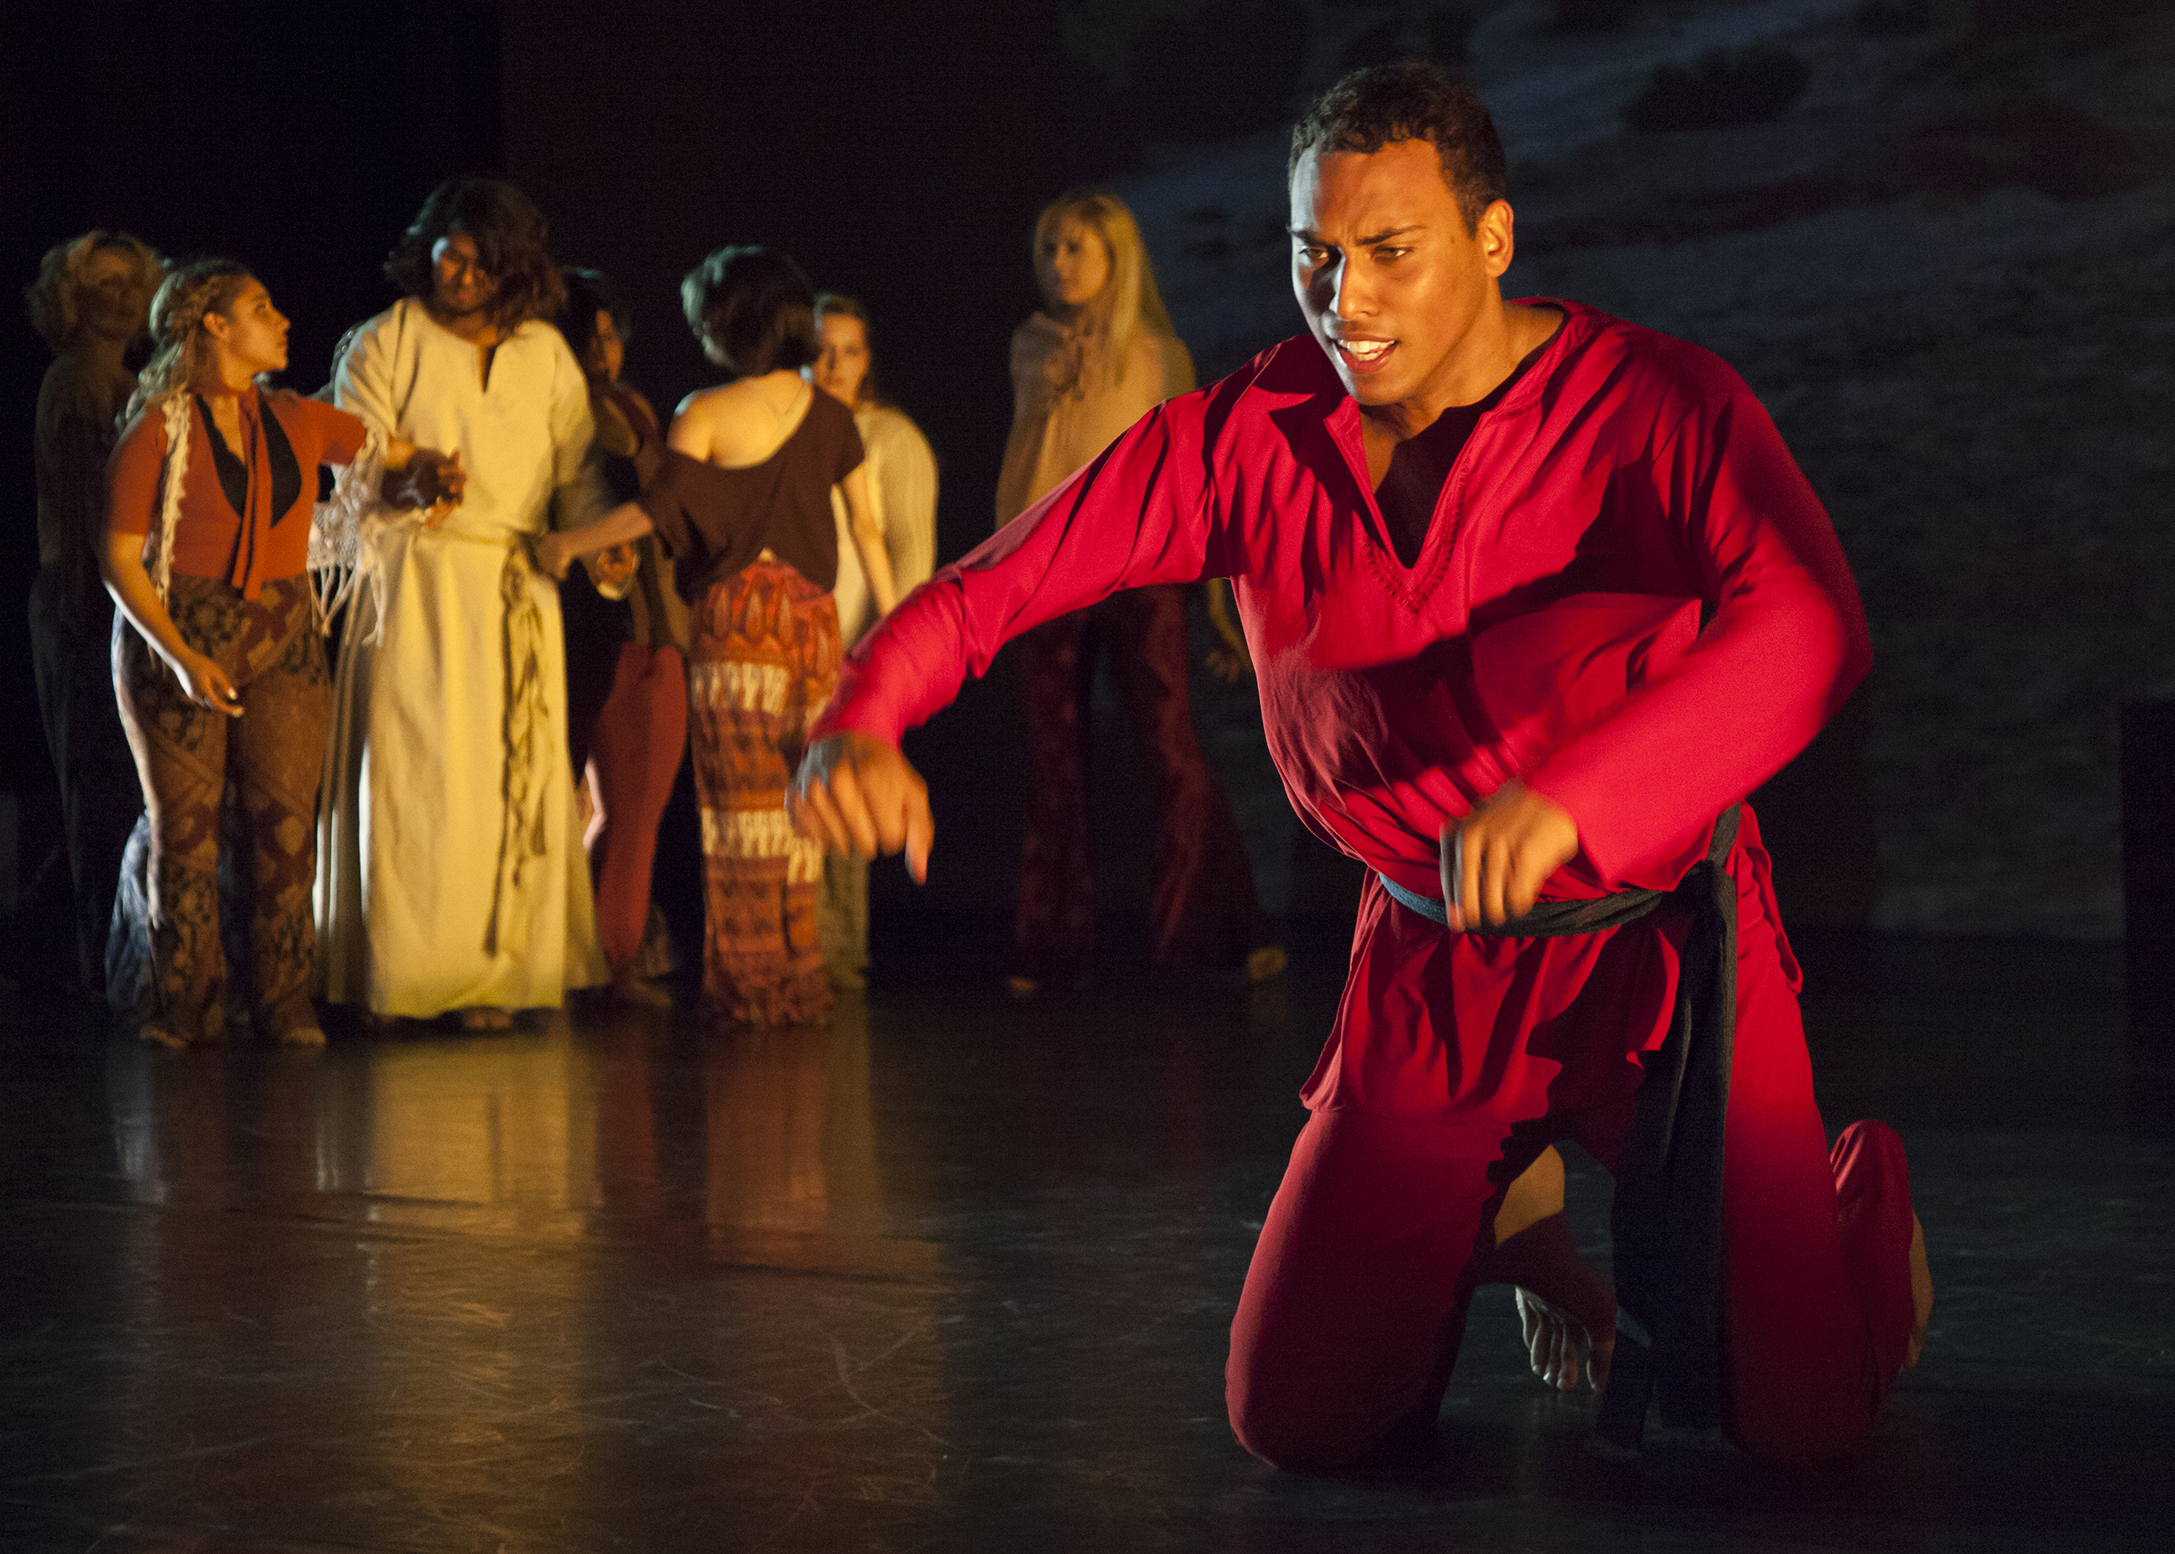  Ean McCabe plays the role of the devil during one of the dance pieces for the concert “Vignettes.” During this portion of the concert, McCabe tries to tempt Jesus but fails to do so. Vignettes opens at the Performing Arts Center of Pierce College in